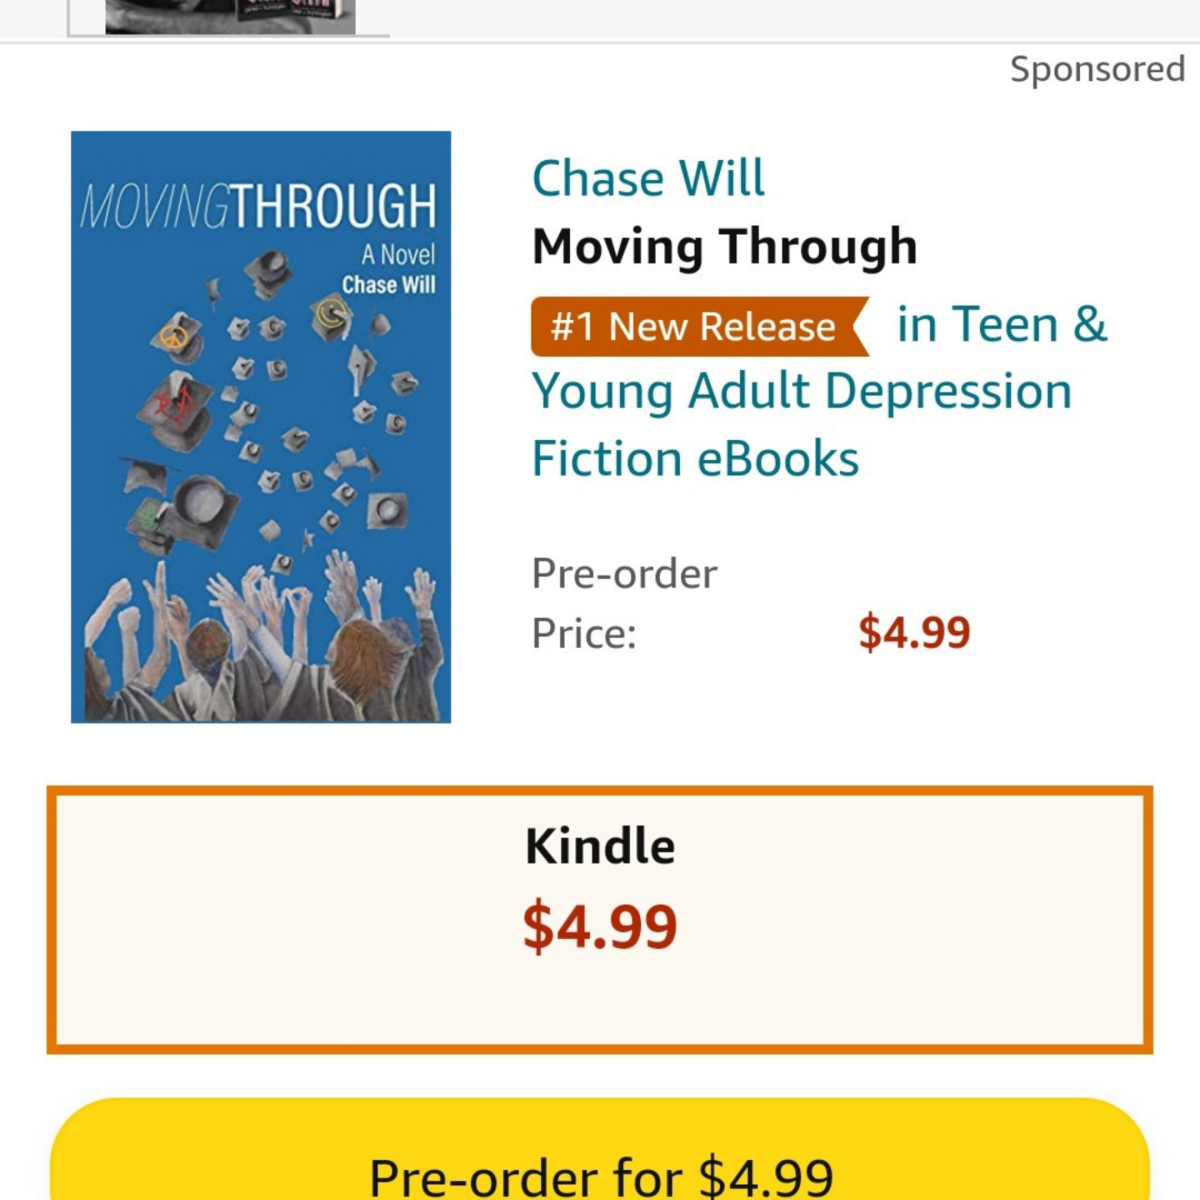 “Moving Through” is #1 in Pre-orders!